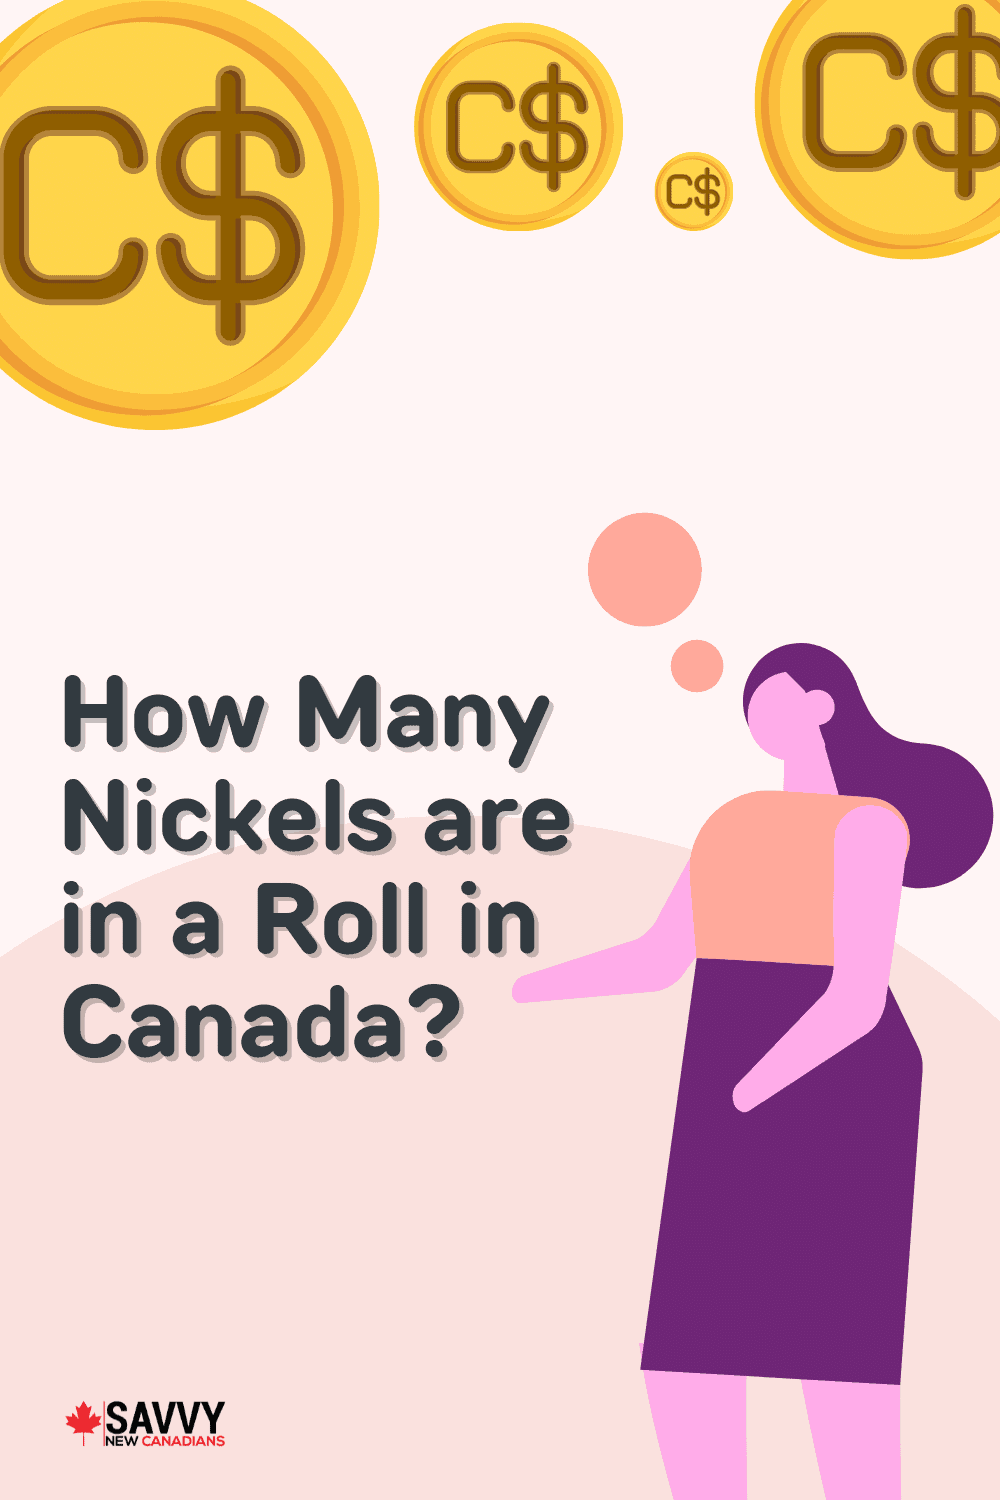 How Many Nickels Are in a Roll in Canada?